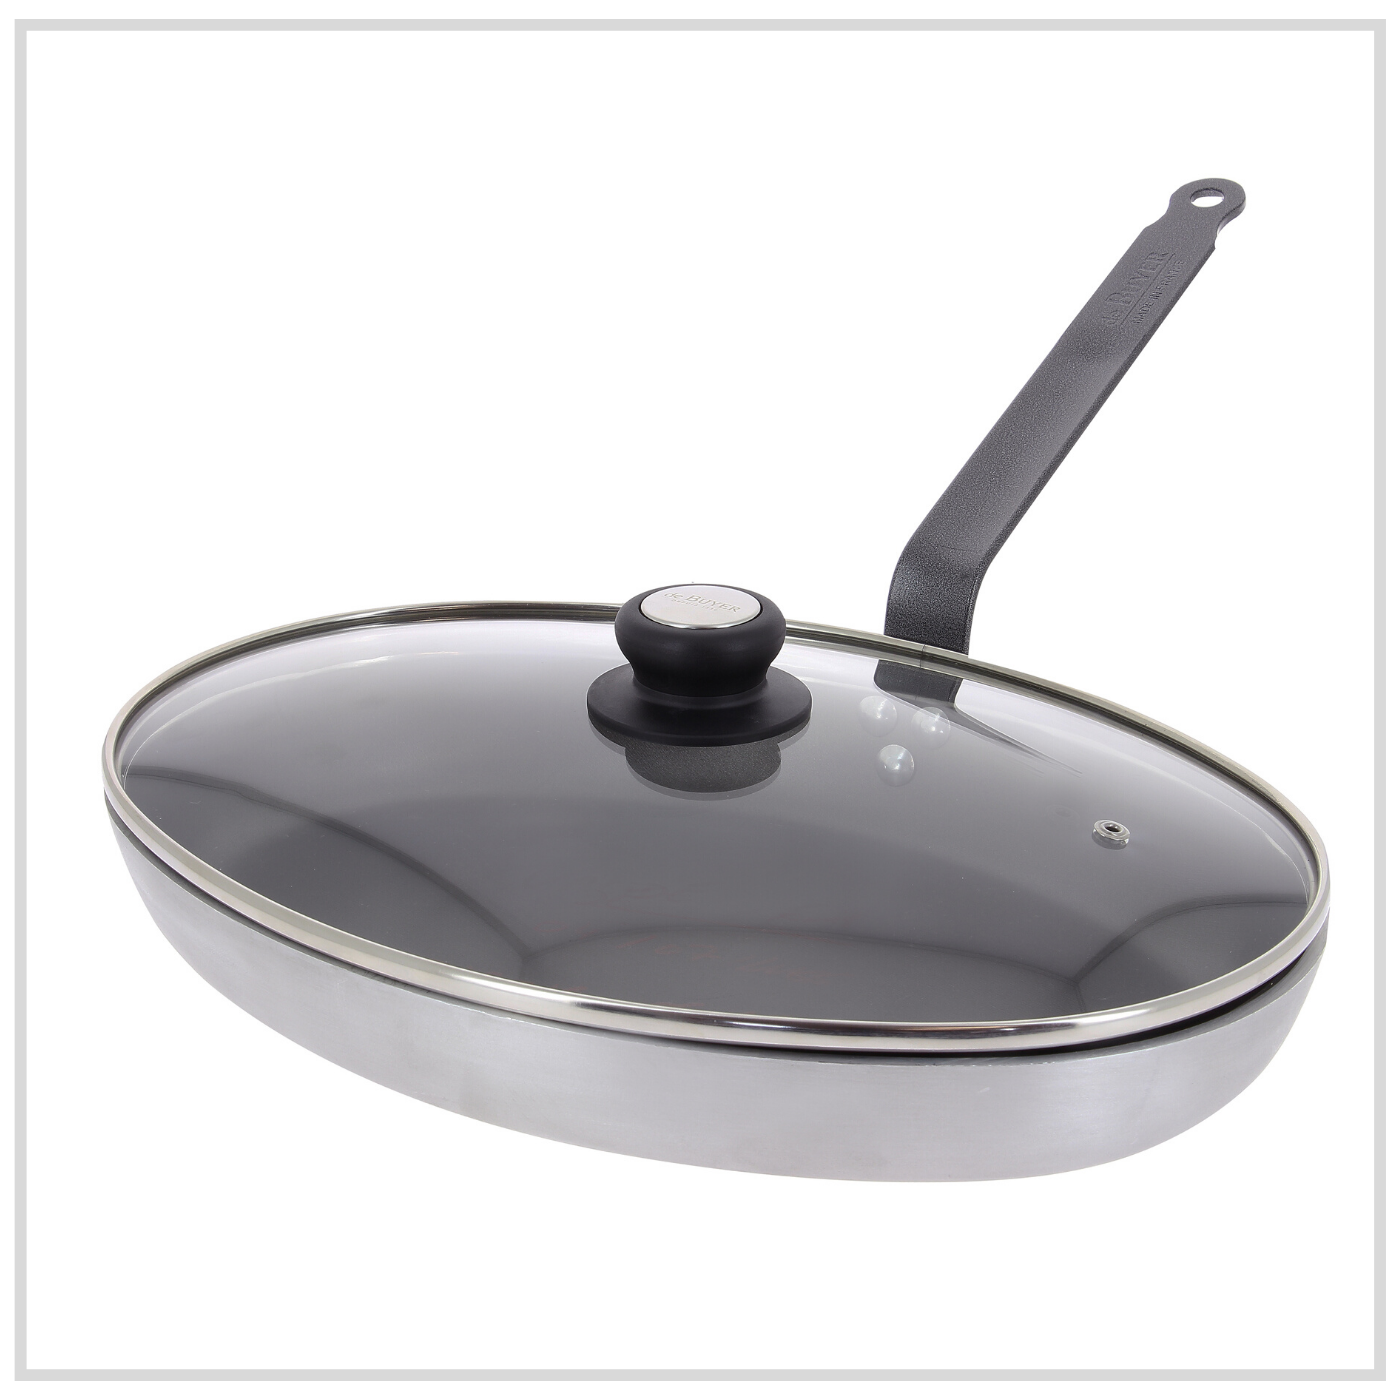 De Buyer Non Stick Oval Shaped Fish Pan with Lid - 36cm